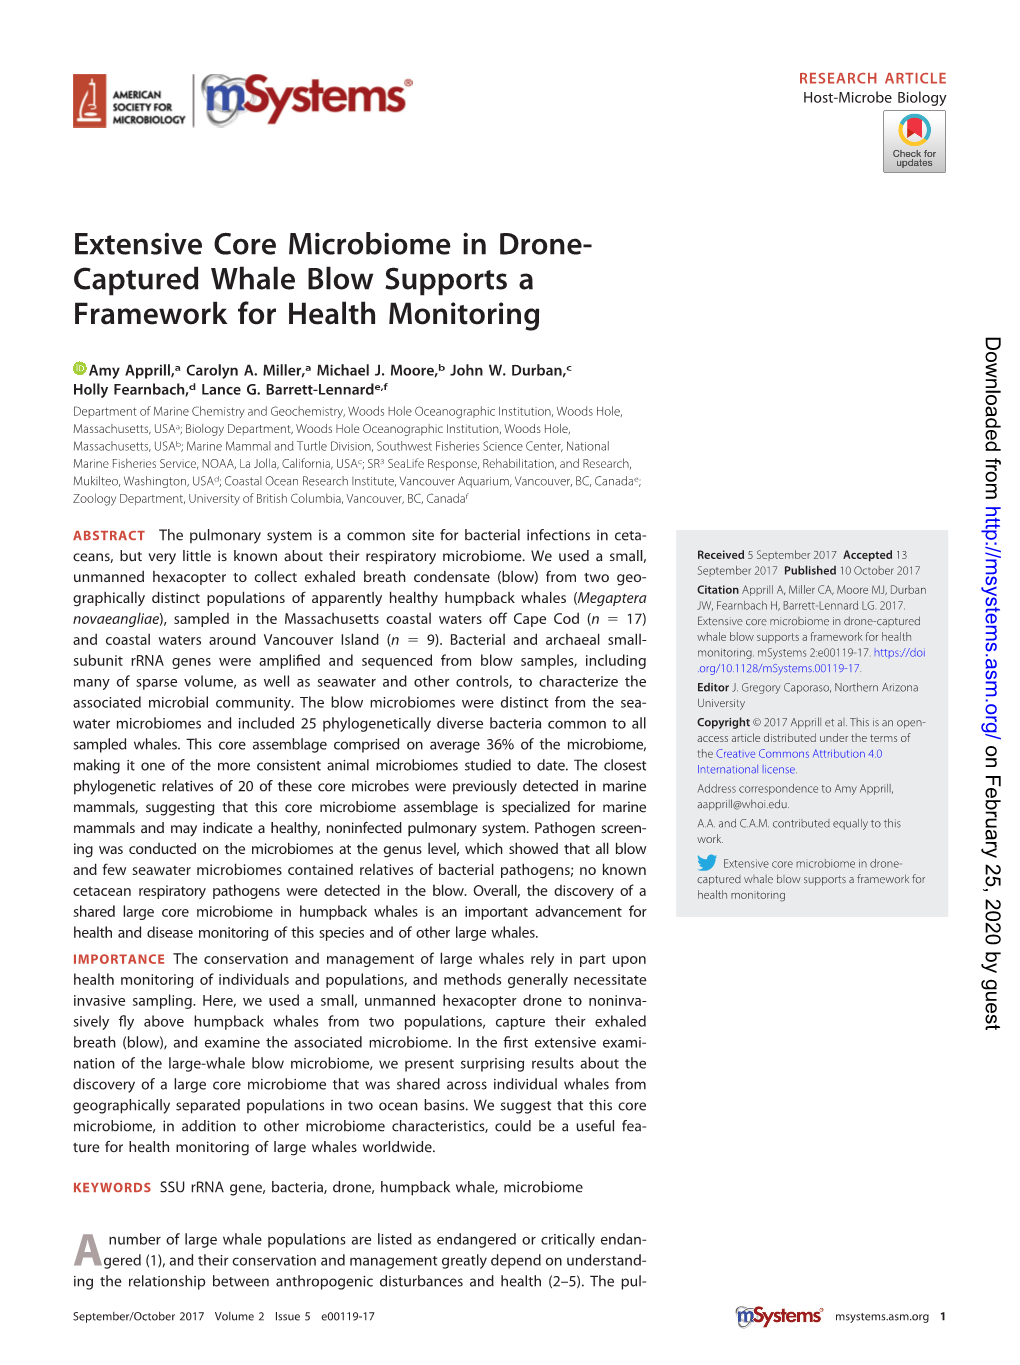 Extensive Core Microbiome in Drone-Captured Whale Blow